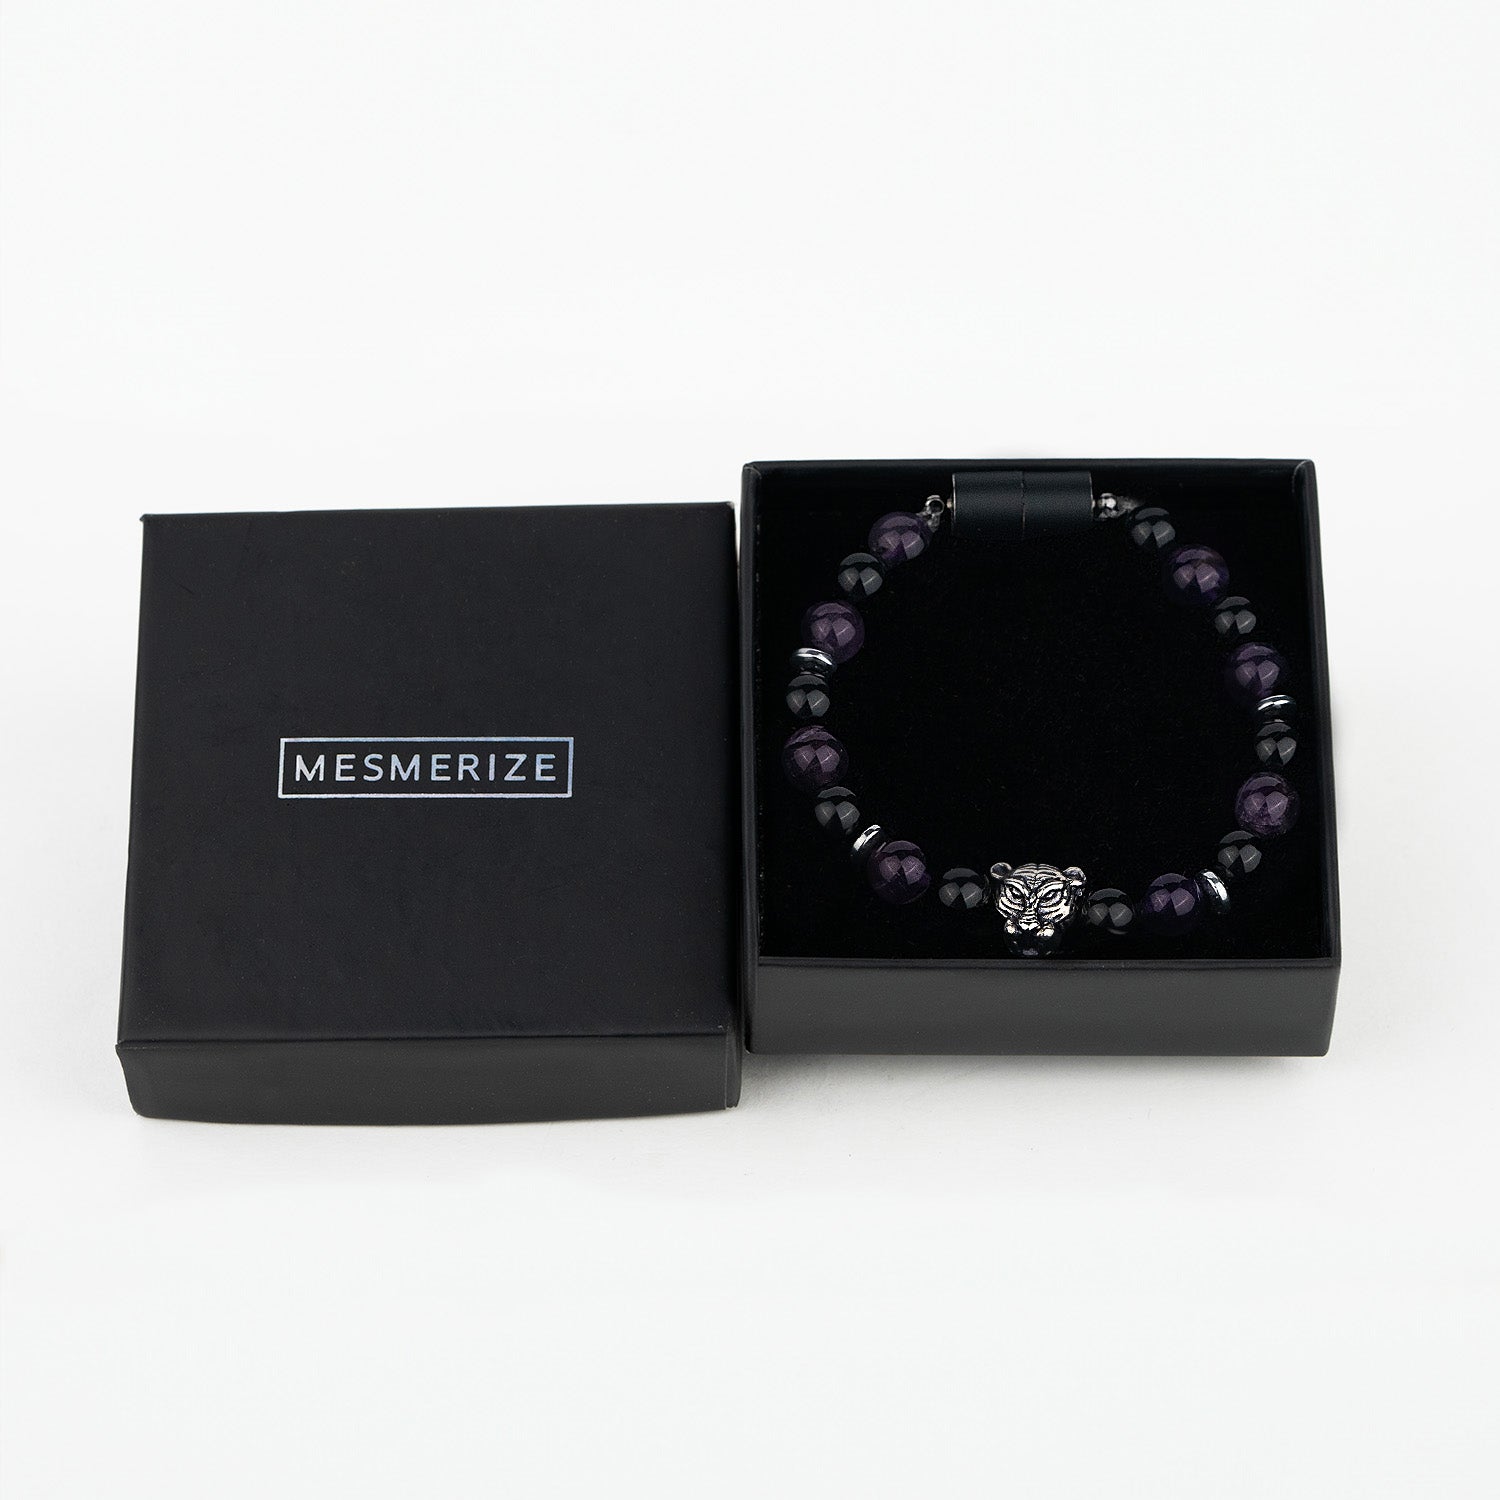 Natural Stone Jewellery Wellness Gloss Onyx and Amethyst Natural Stone Bracelet With Magsnap